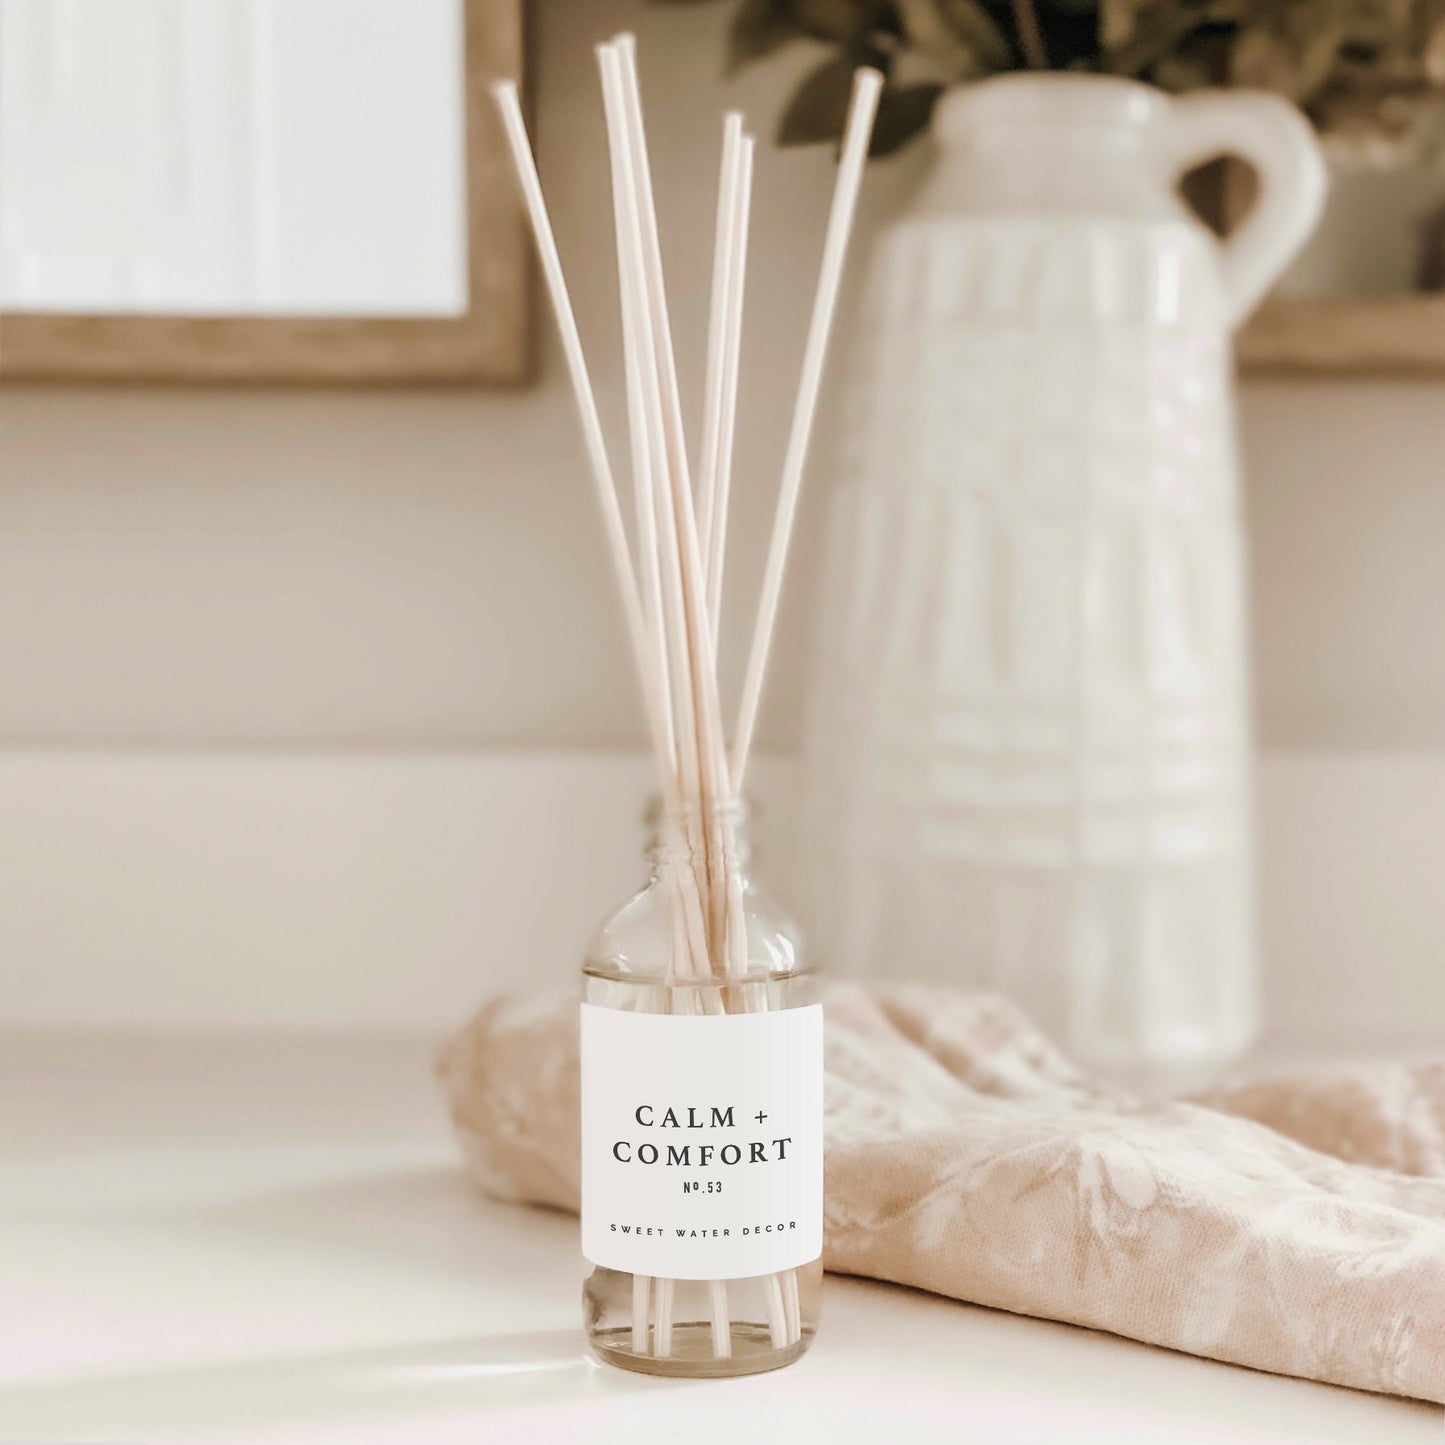 Calm and Comfort Reed Diffuser